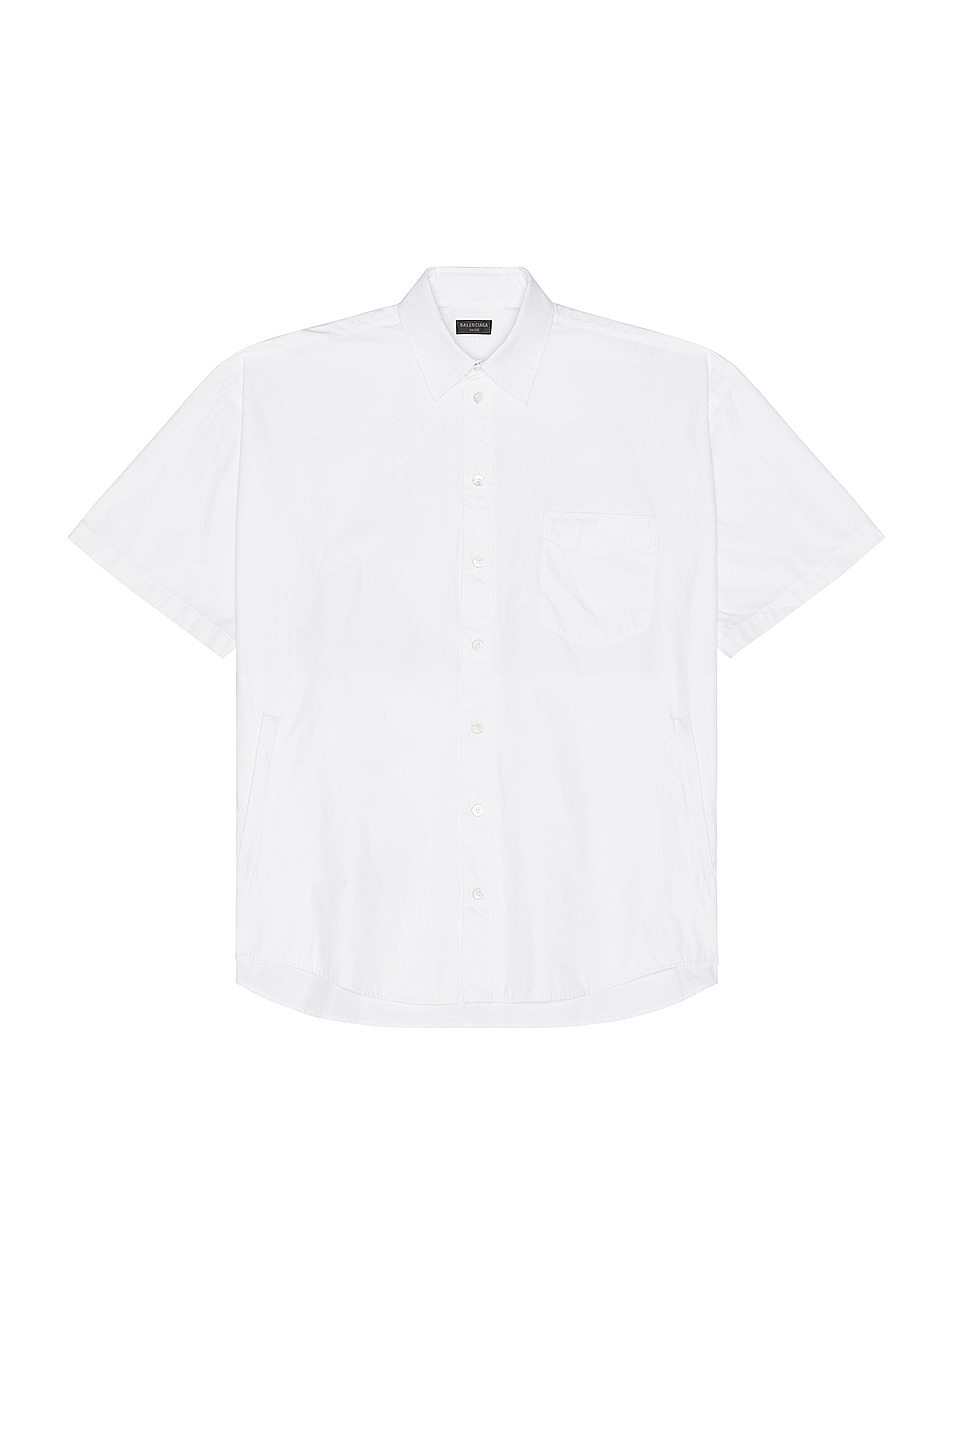 Image 1 of Balenciaga S/s Large Fit Shirt in White & Black